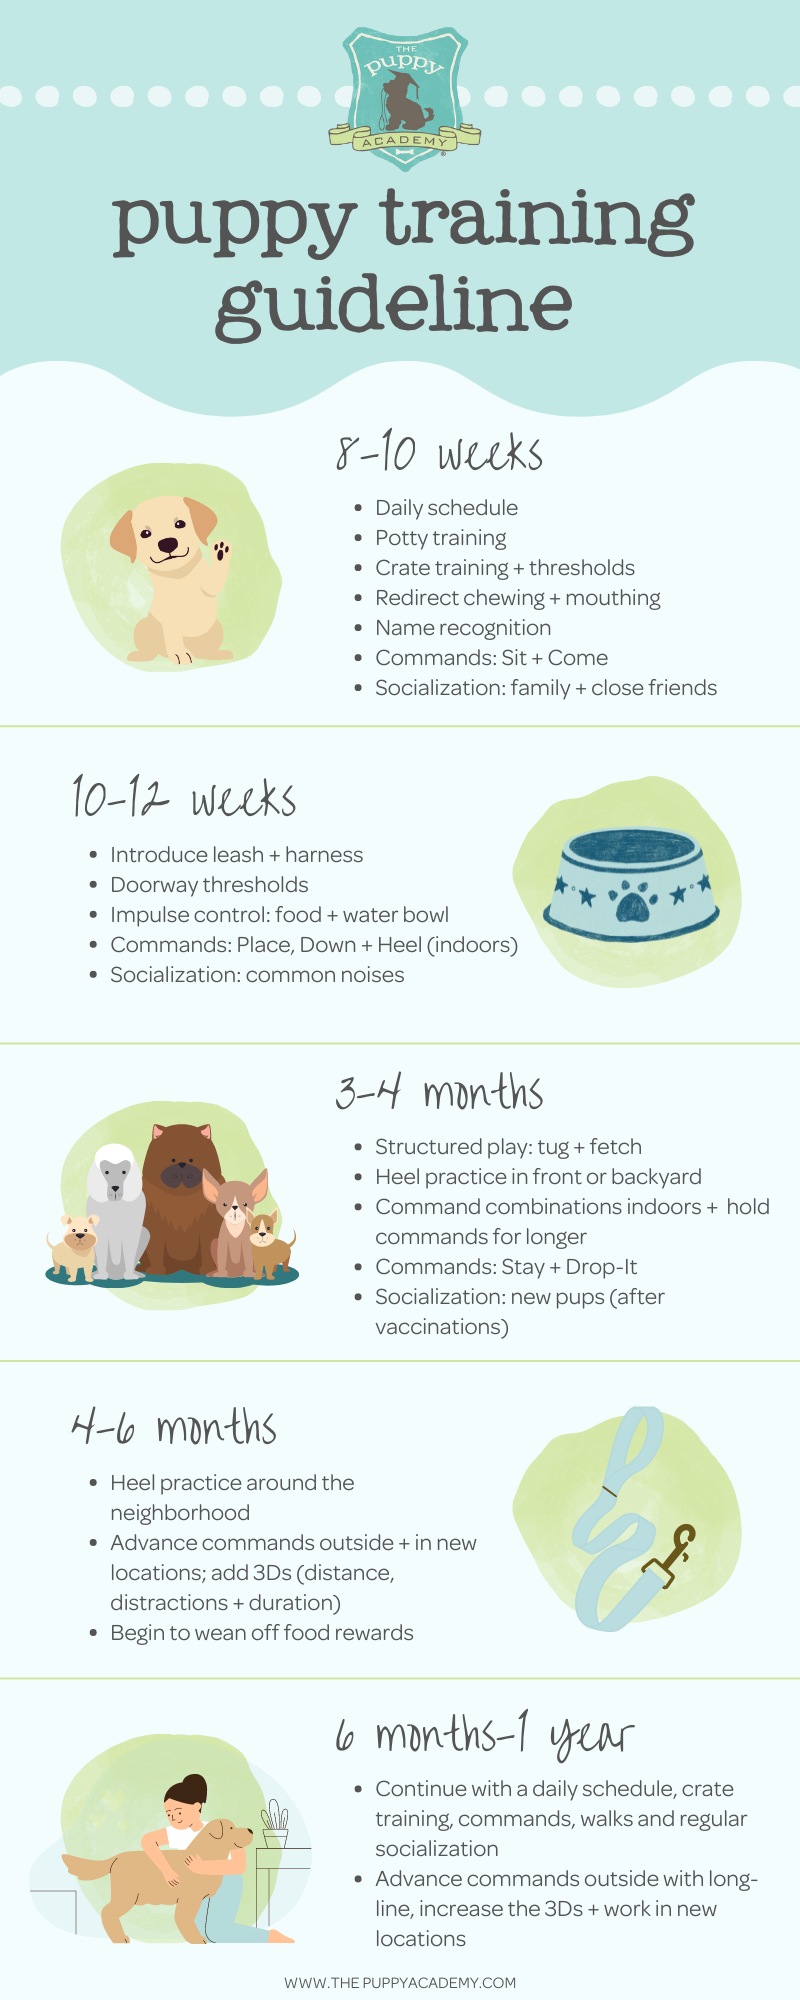 potty training tips for 5 month old puppy A complete guide to puppy potty training